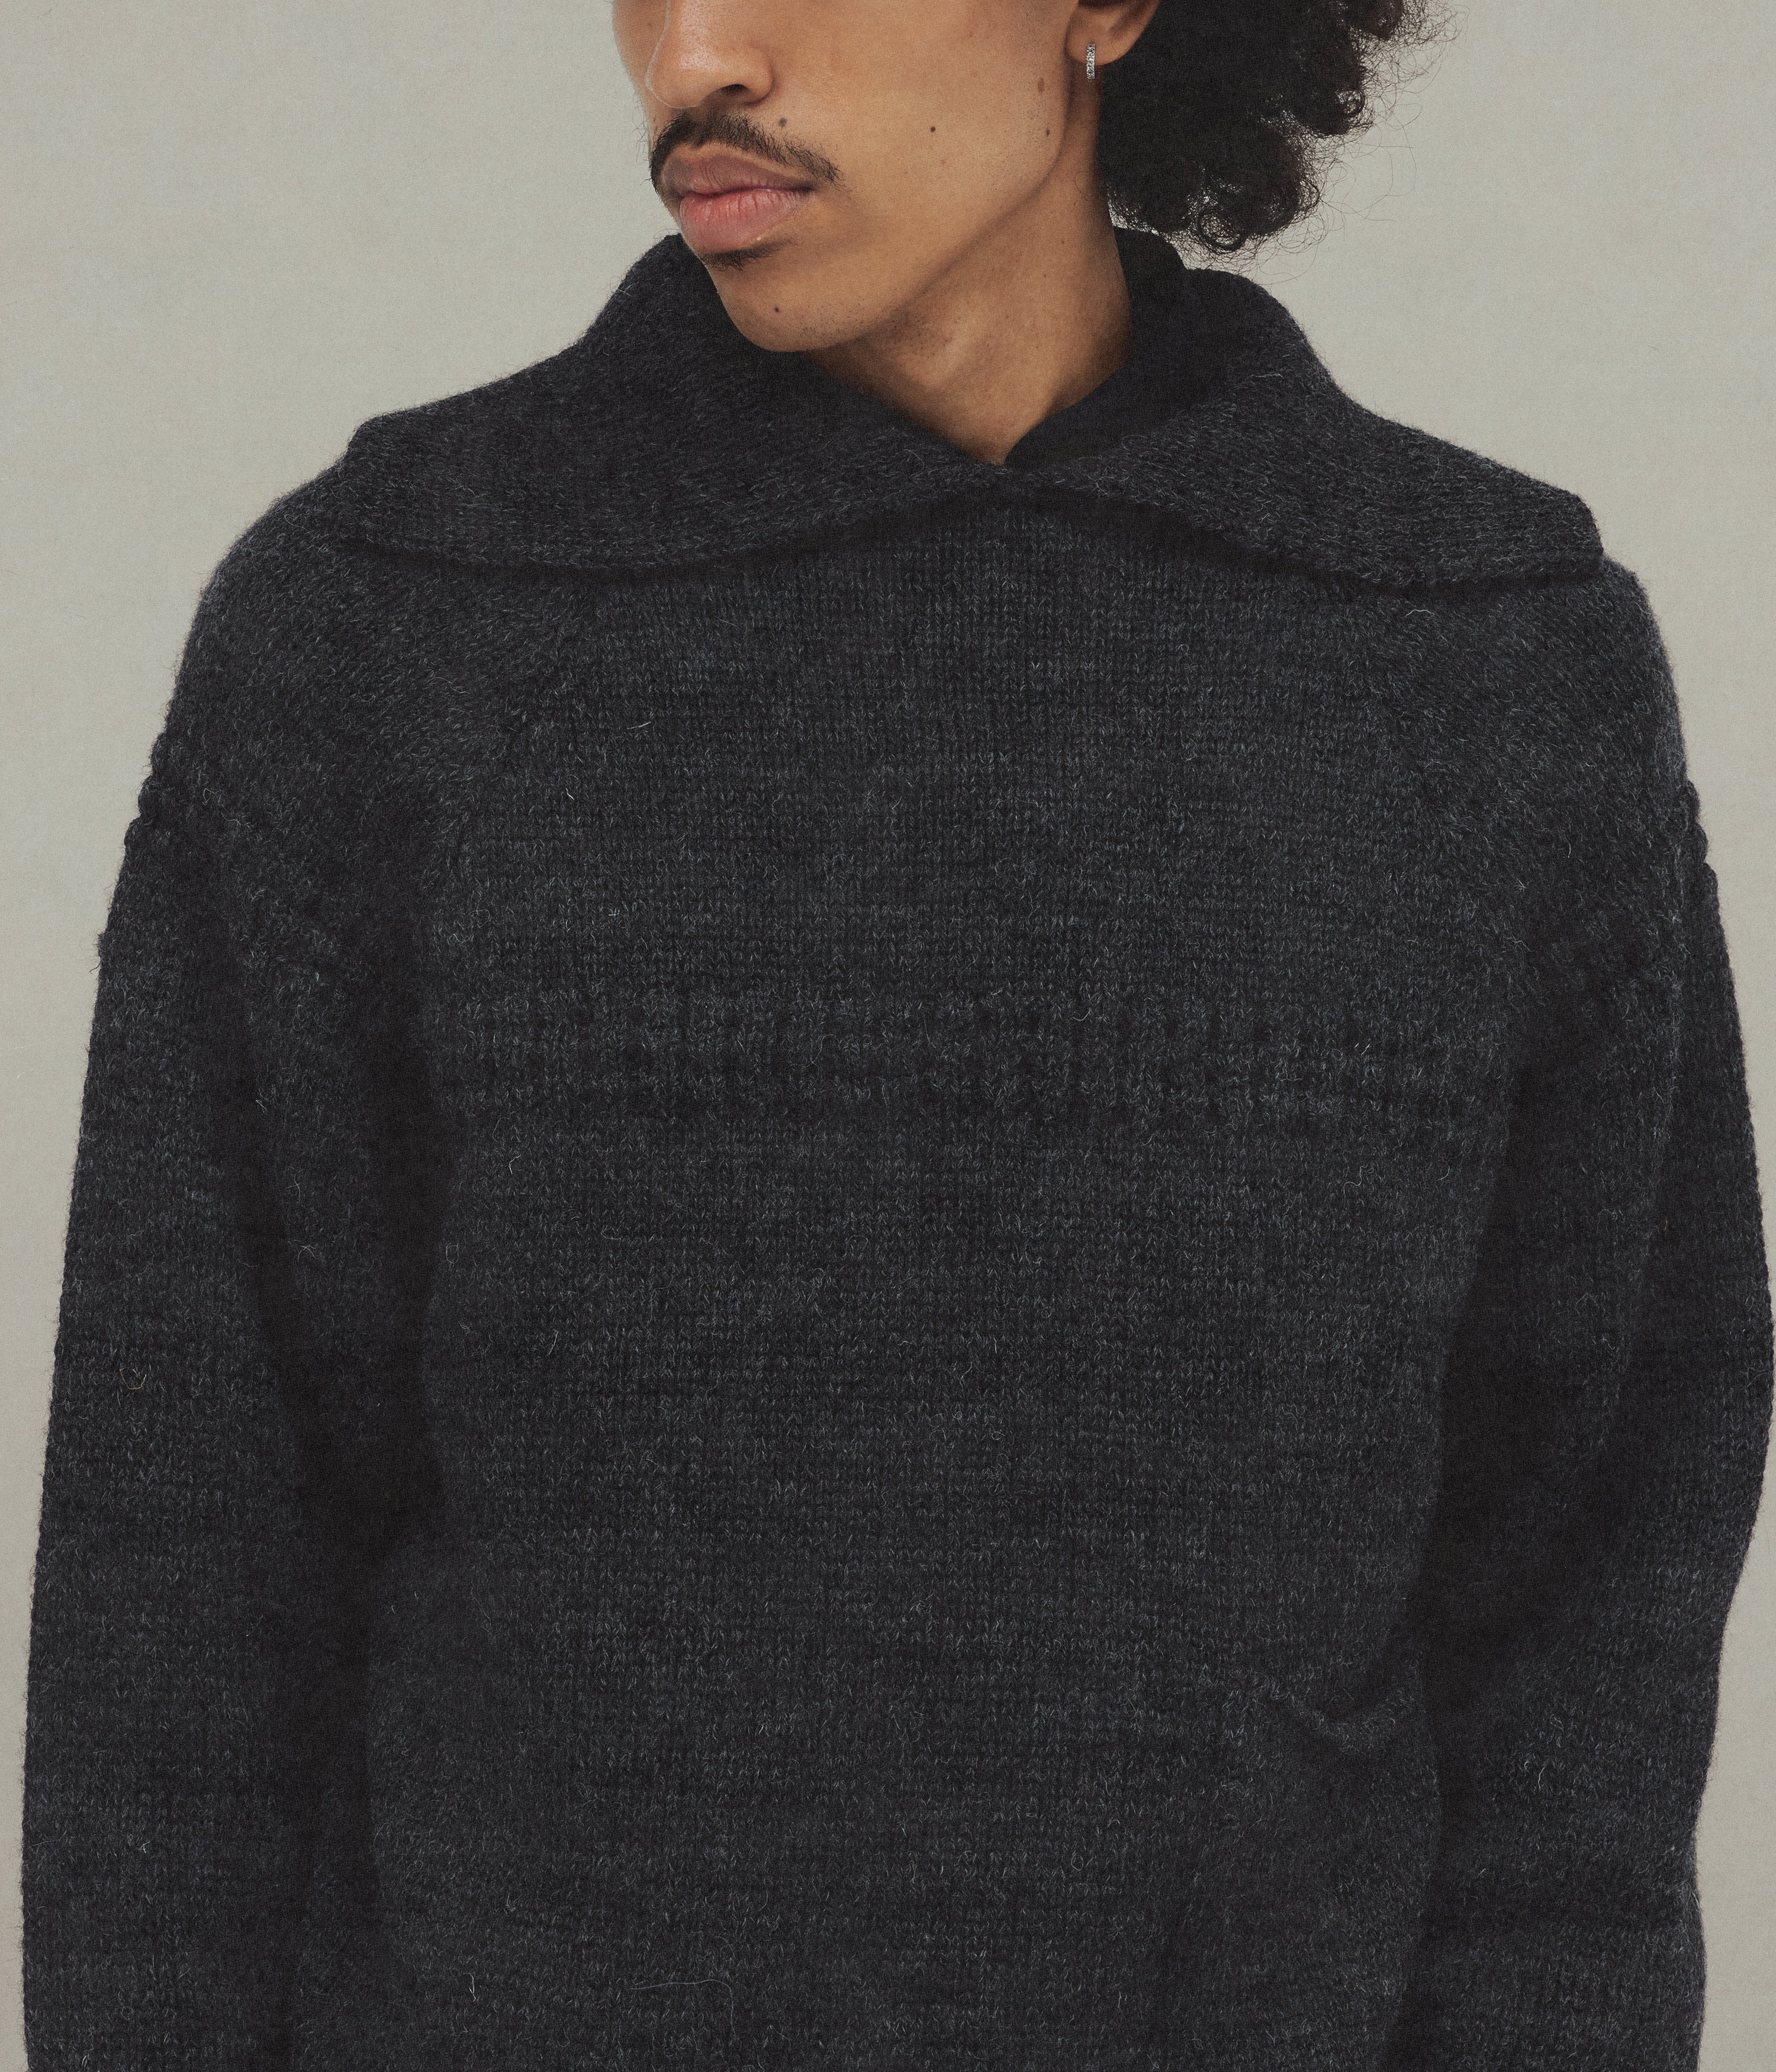 Sailor's Neck Sweater, CharcoalWOOL100% トップス